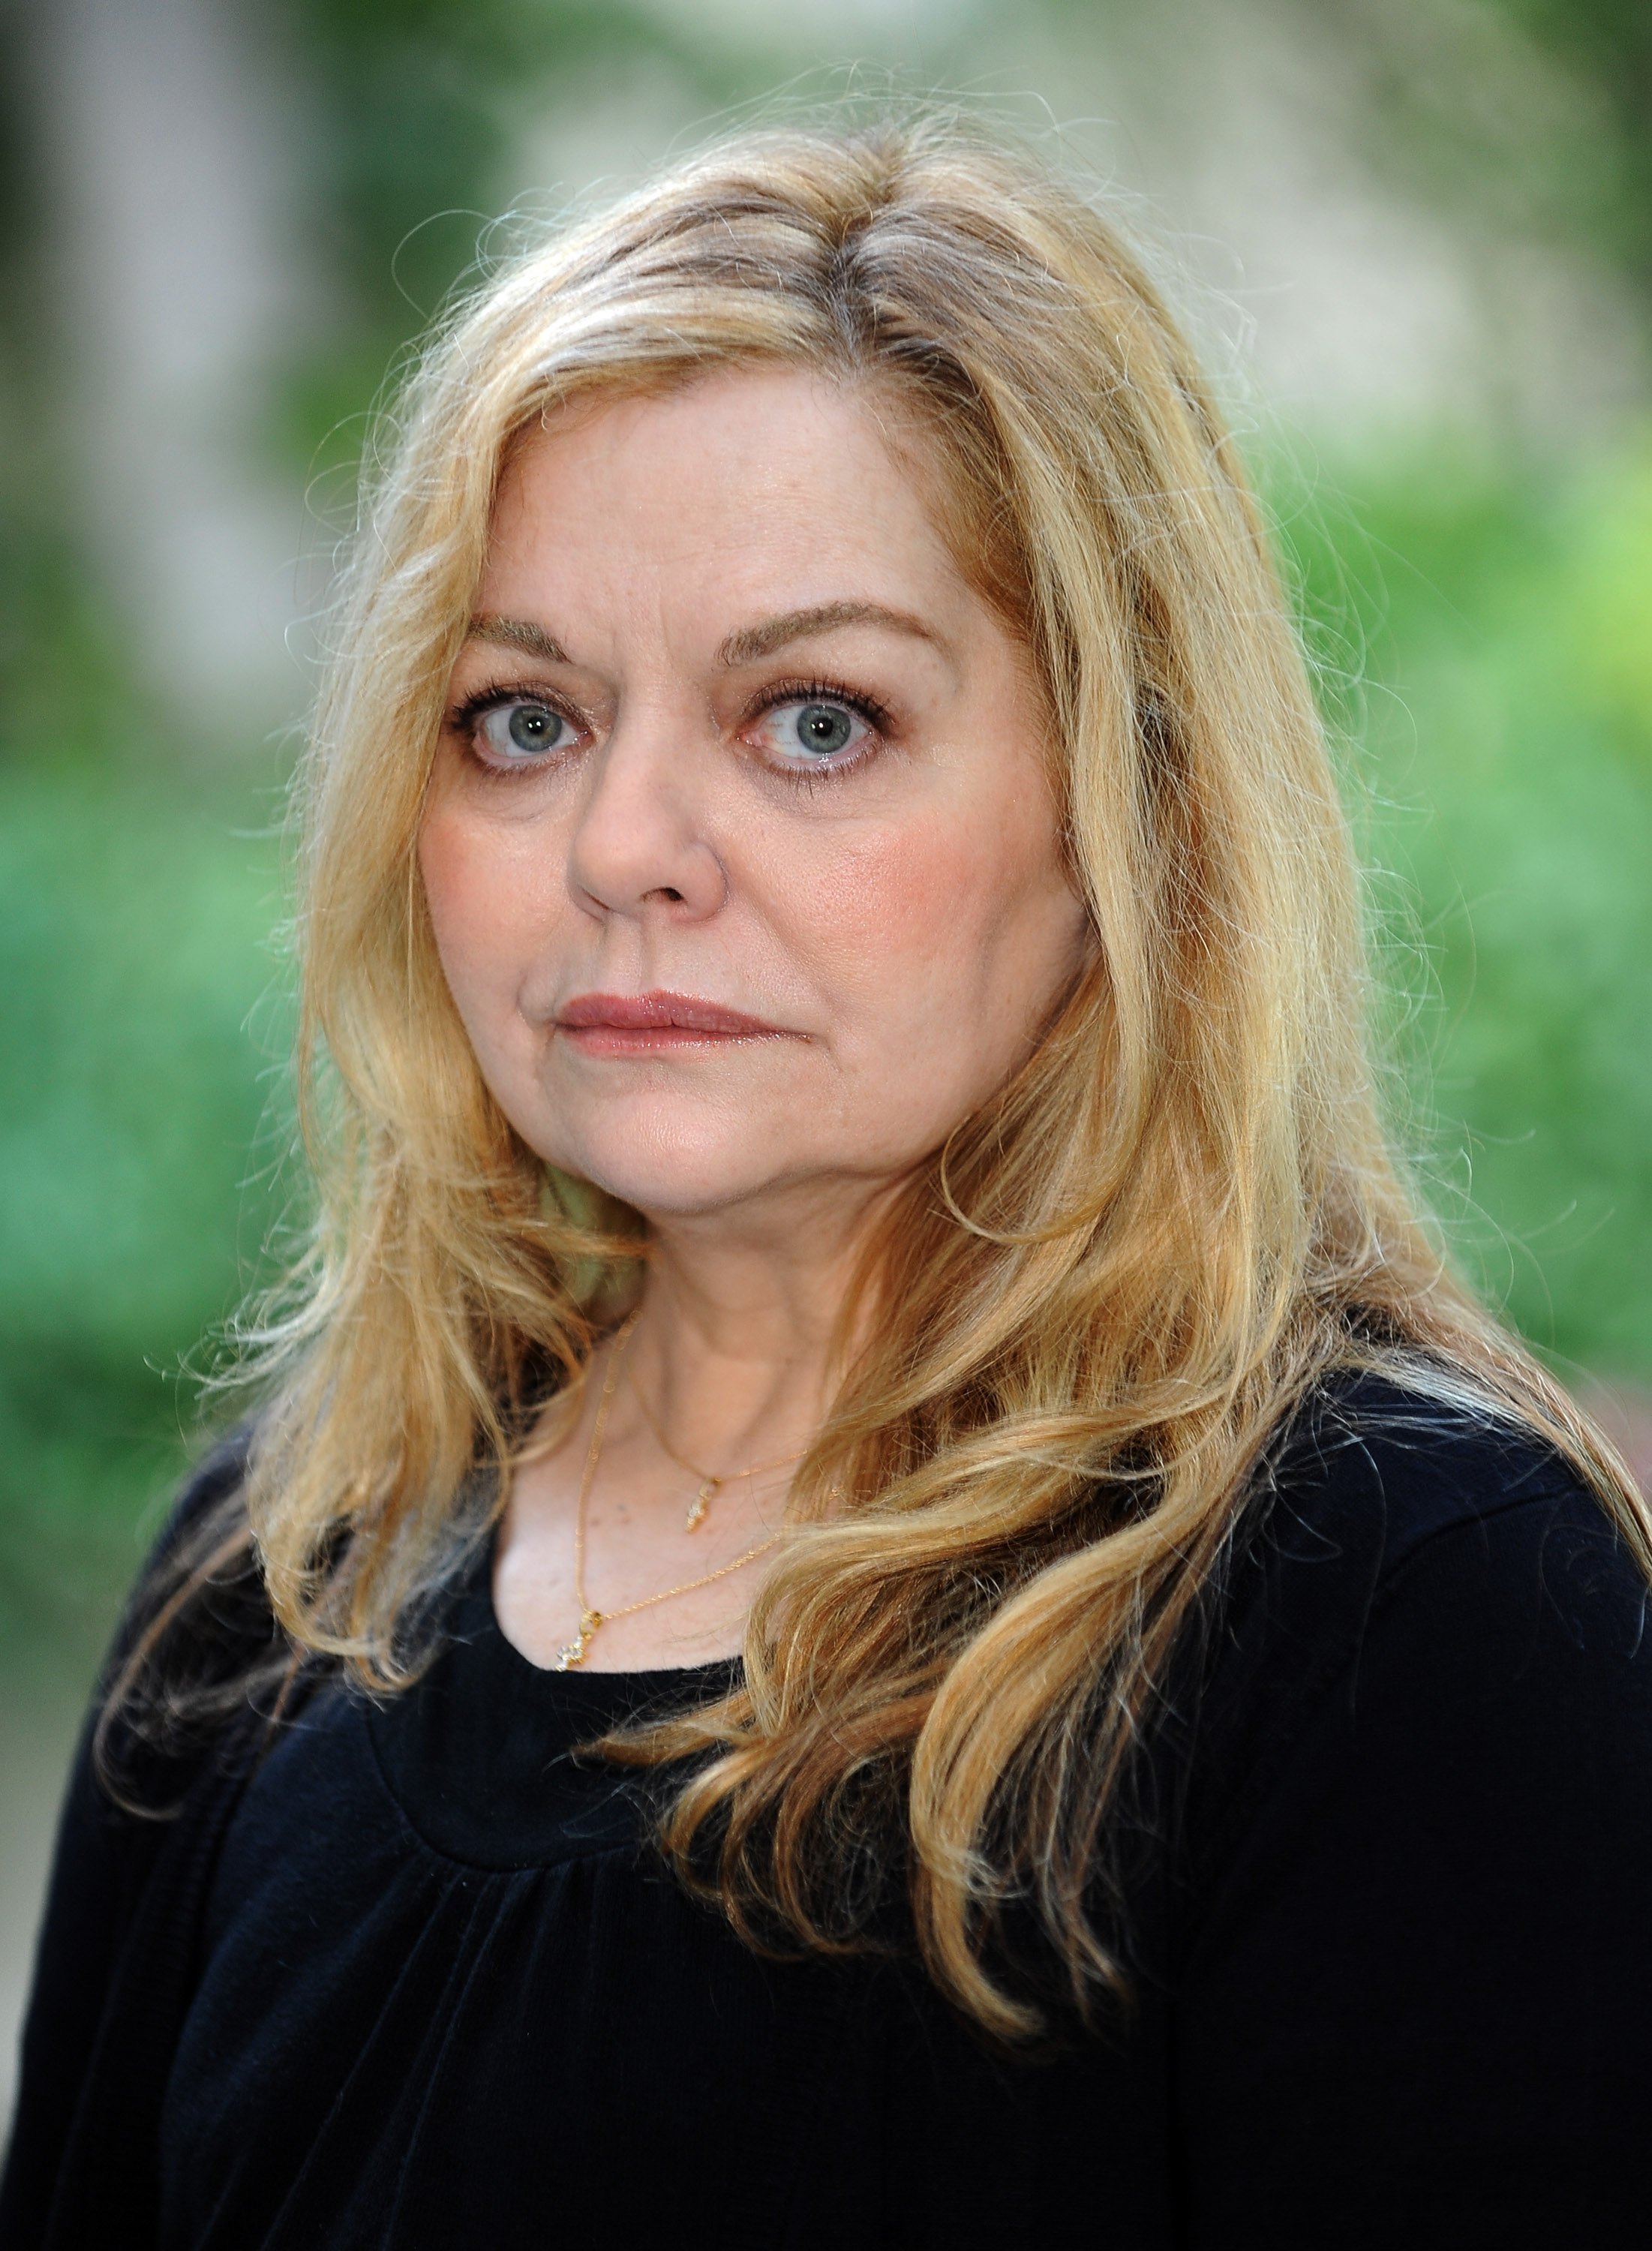 Sharon Murphy, mother of deceased actress Brittany Murphy, during a portrait shoot on January 13, 2010 in Hollywood, California. | Source: Getty Images